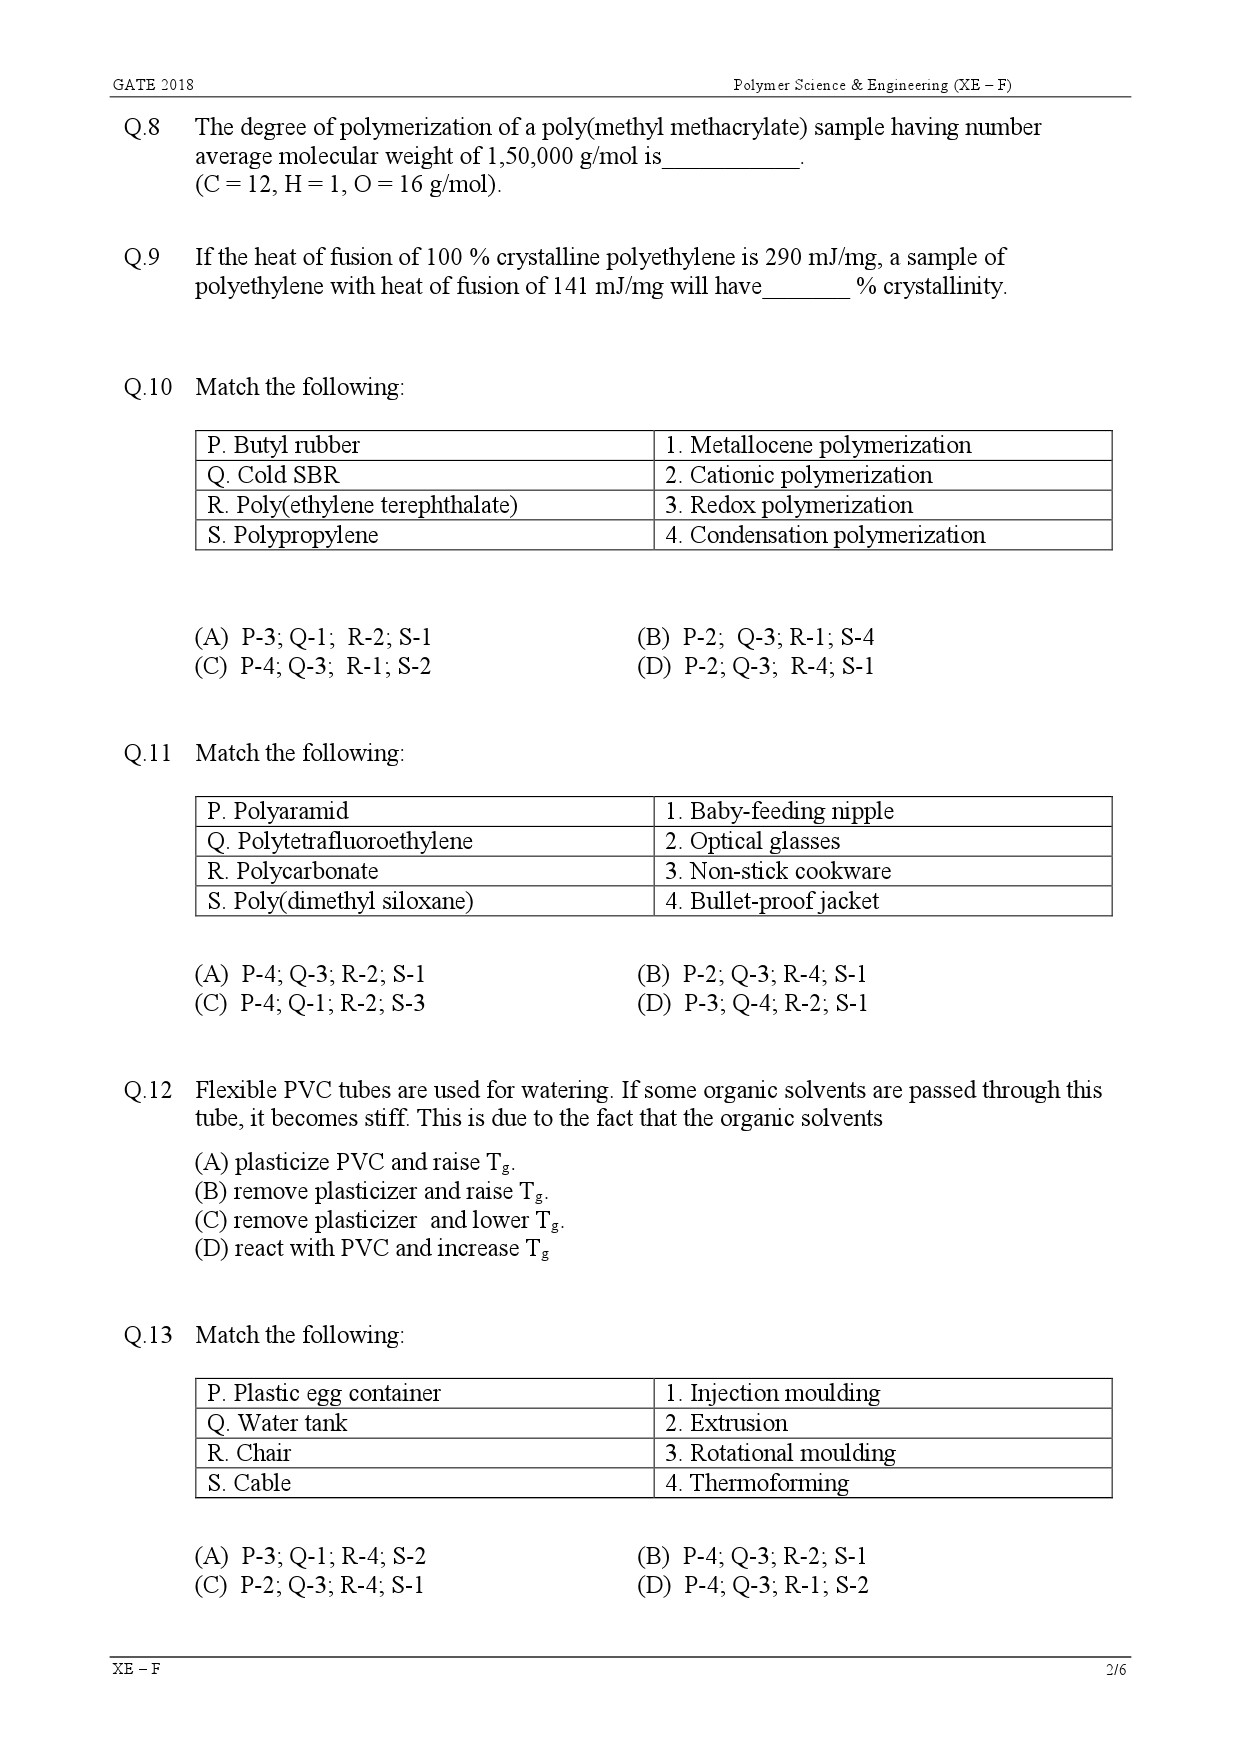 GATE Exam Question Paper 2018 Engineering Sciences 27